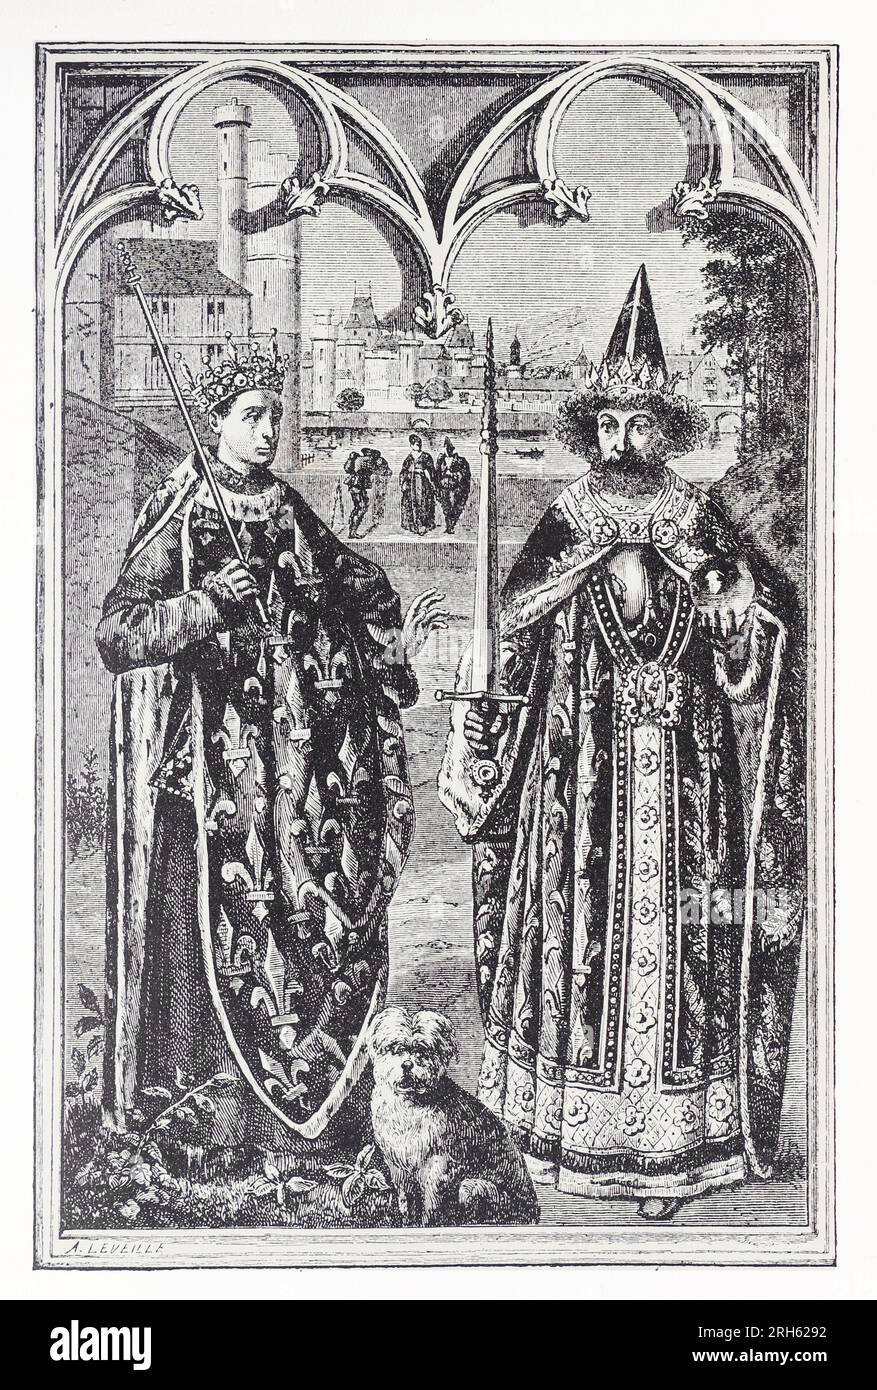 Charlemagne and Saint Louis. After a picture in the Palaise de Justice, Paris, France. Engraving from Lives of the Saints by Sabin Baring-Gould. Stock Photo